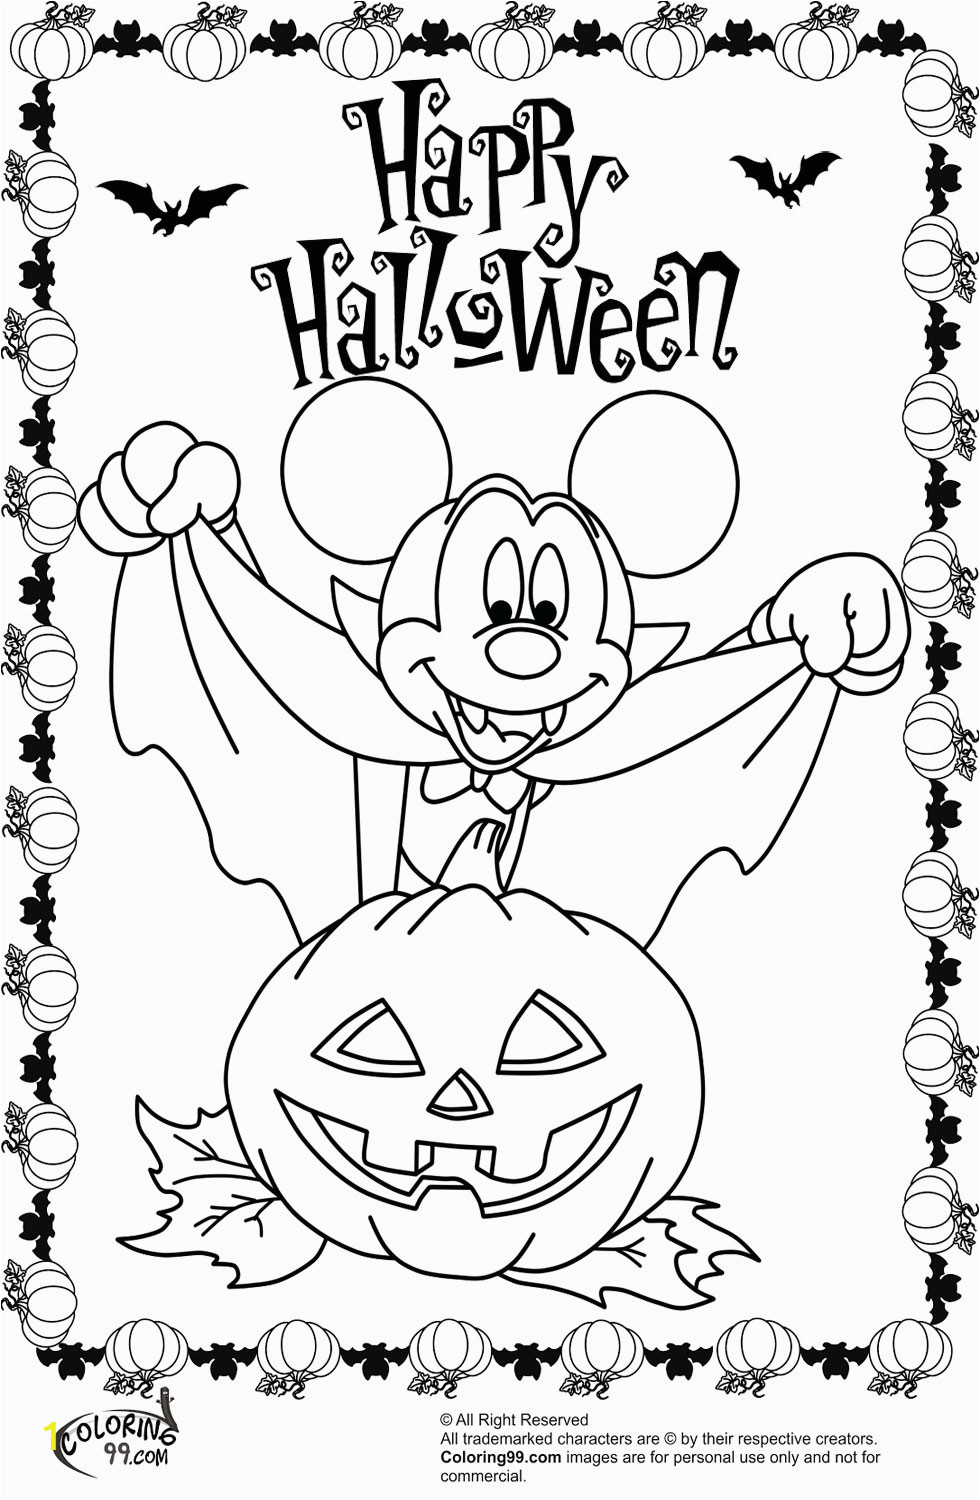 Free Printable Mickey Mouse Halloween Coloring Pages November 2013